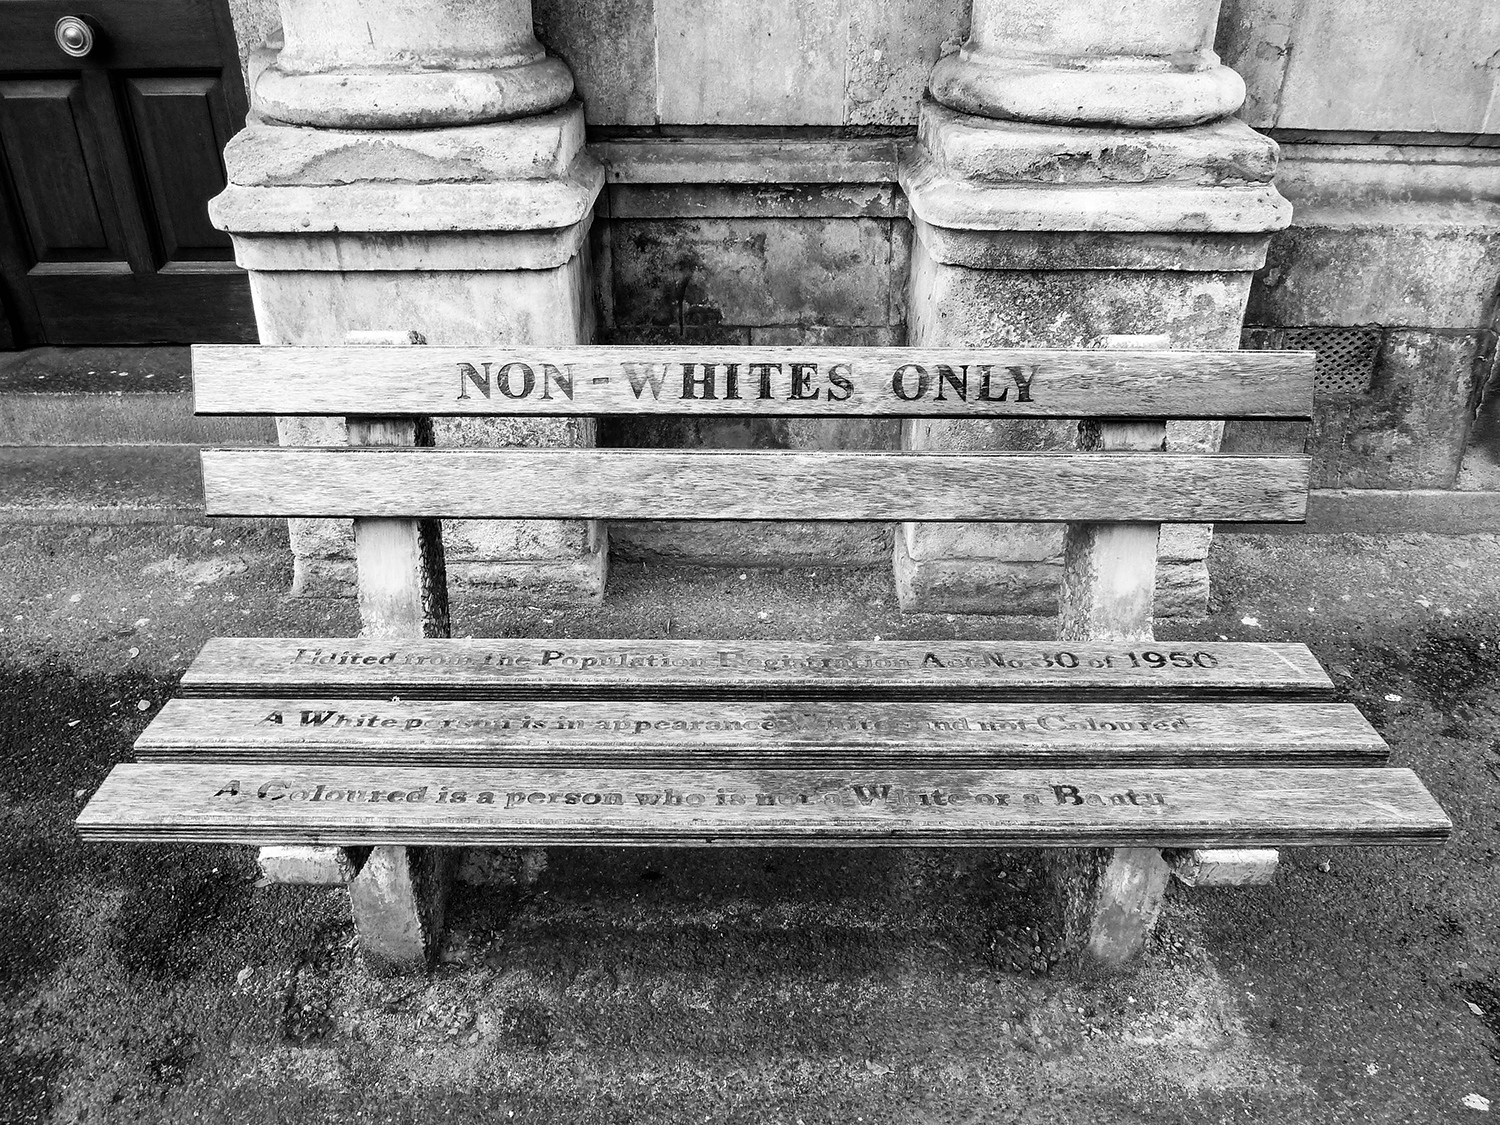 <p>As part of a memory project, artist Roderick Sauls installed two replica Apartheid-era benches outside the High Court Annex in Cape Town in 2007. It was here that race classification hearings took place based on the Population Registration Act (in effect from 1950 to 1991). A second law, the Separate Amenities Act of 1953, ensured the pseudo-mantra of 'separate but equal' by installing facilities like benches and water fountains designated 'Whites only' or 'Non-whites only'. <br /></p><p>Sauls' benches quote precise definitions from the legal text as a reminder of the fallacy, and provoke quite a reaction when stumbled upon...</p>